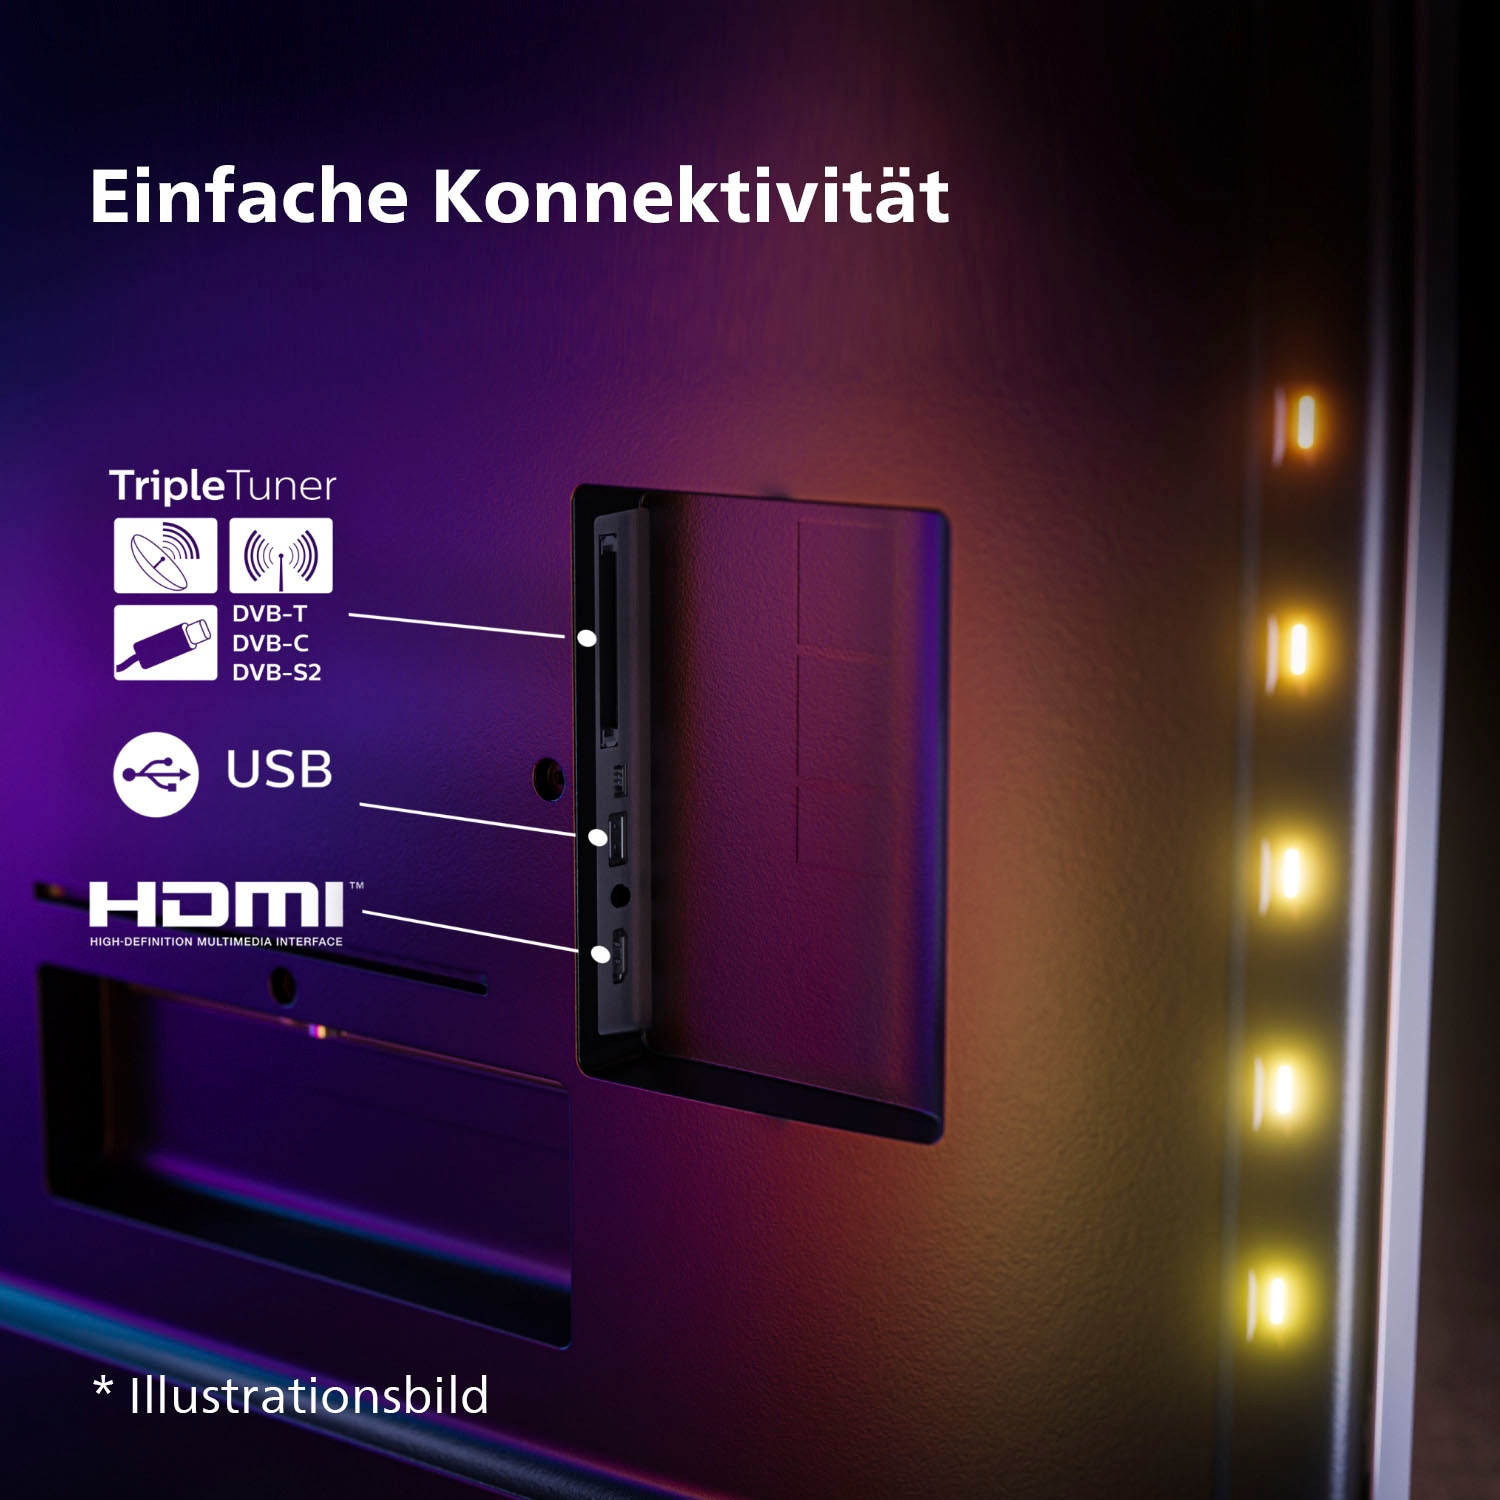 Philips LED-Fernseher, 139 cm/55 Zoll, 4K Ultra HD, Android TV-Google TV-Smart-TV, 3-seitiges Ambilight